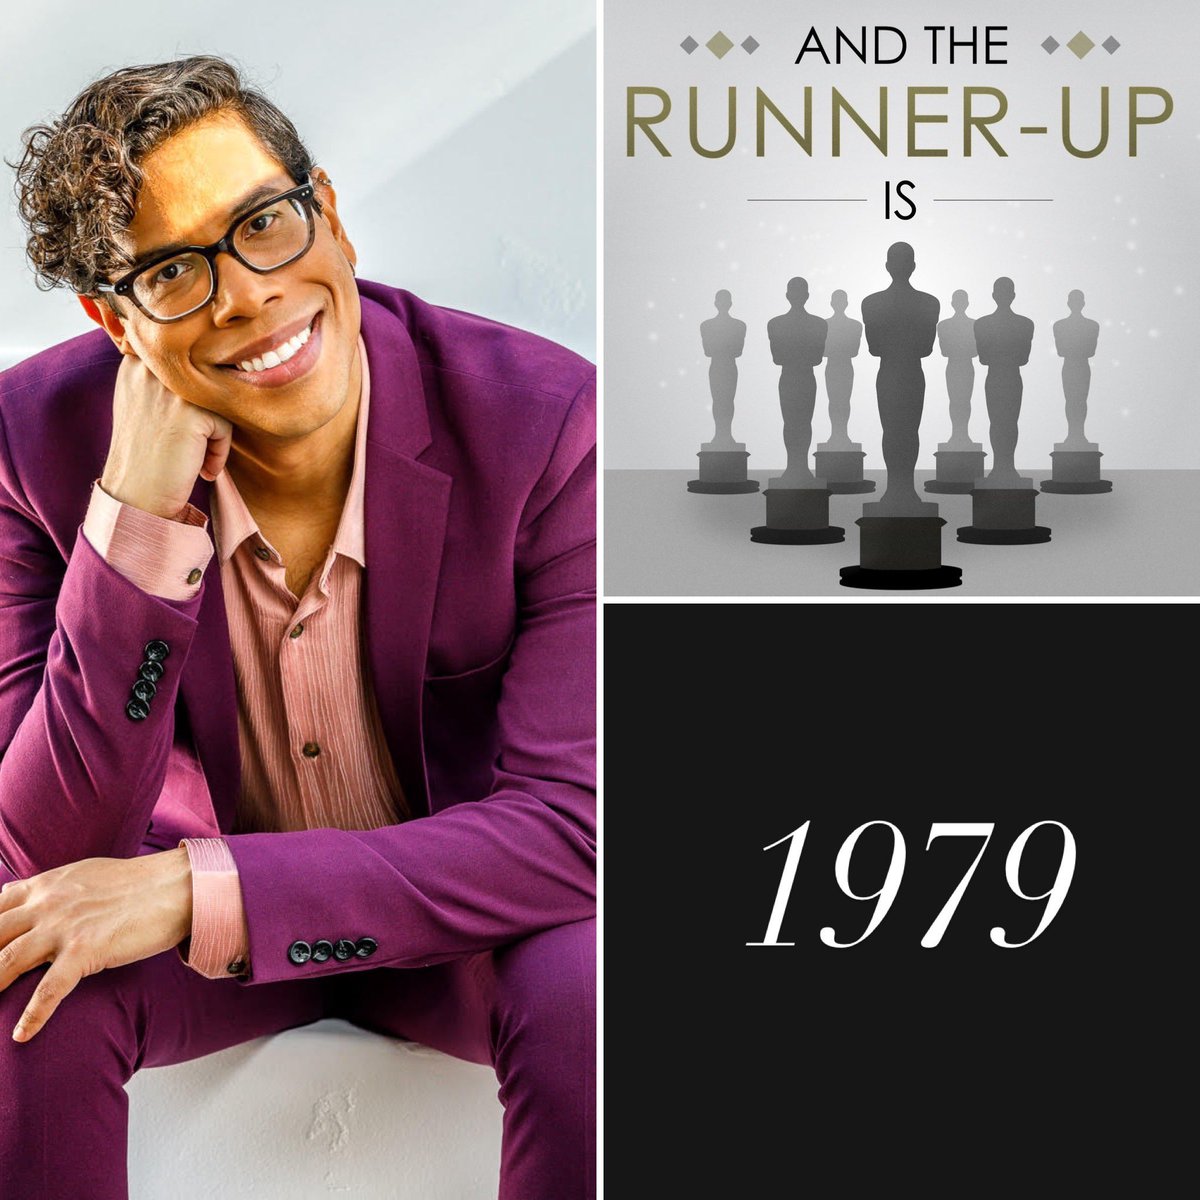 Introducing the guest for the season finale of the @OscarRunnerUp Best Actress series! On Aug. 2, @StevenCanals, the Emmy-nominated co-creator of Pose, joins me in breaking down the 1979 Best Actress race. Subscribe now if you haven’t already!